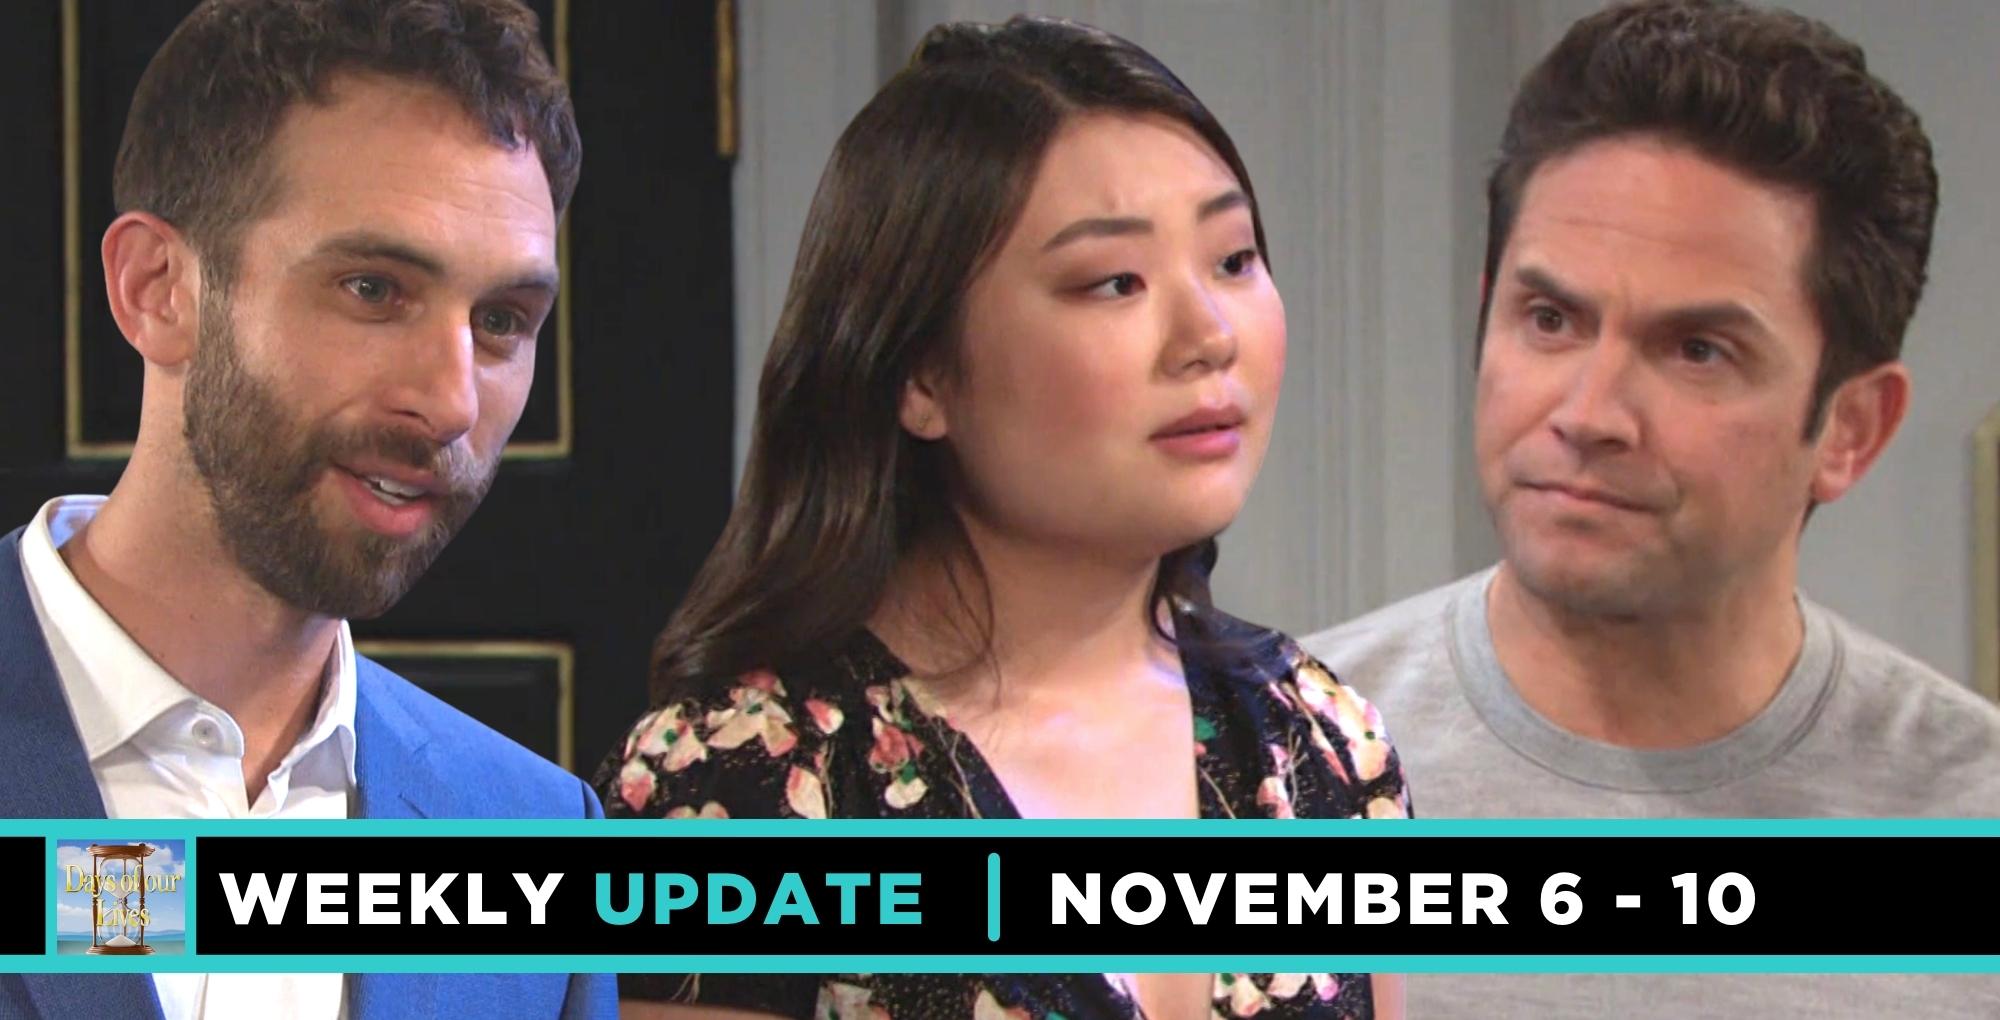 days of our lives weekly update spoilers.